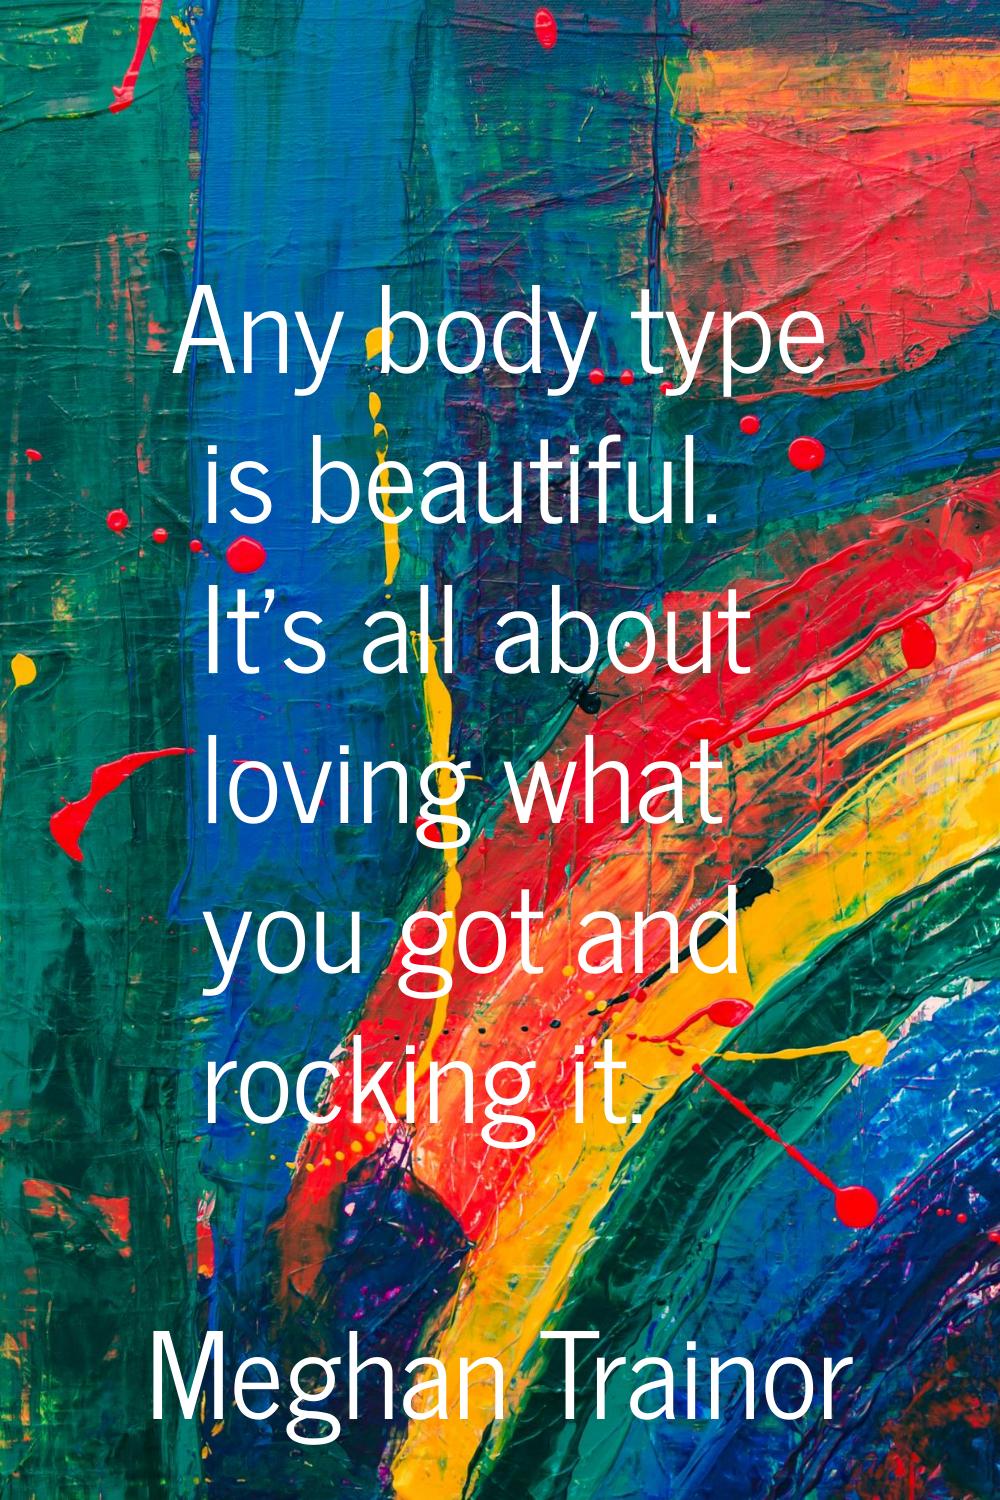 Any body type is beautiful. It's all about loving what you got and rocking it.